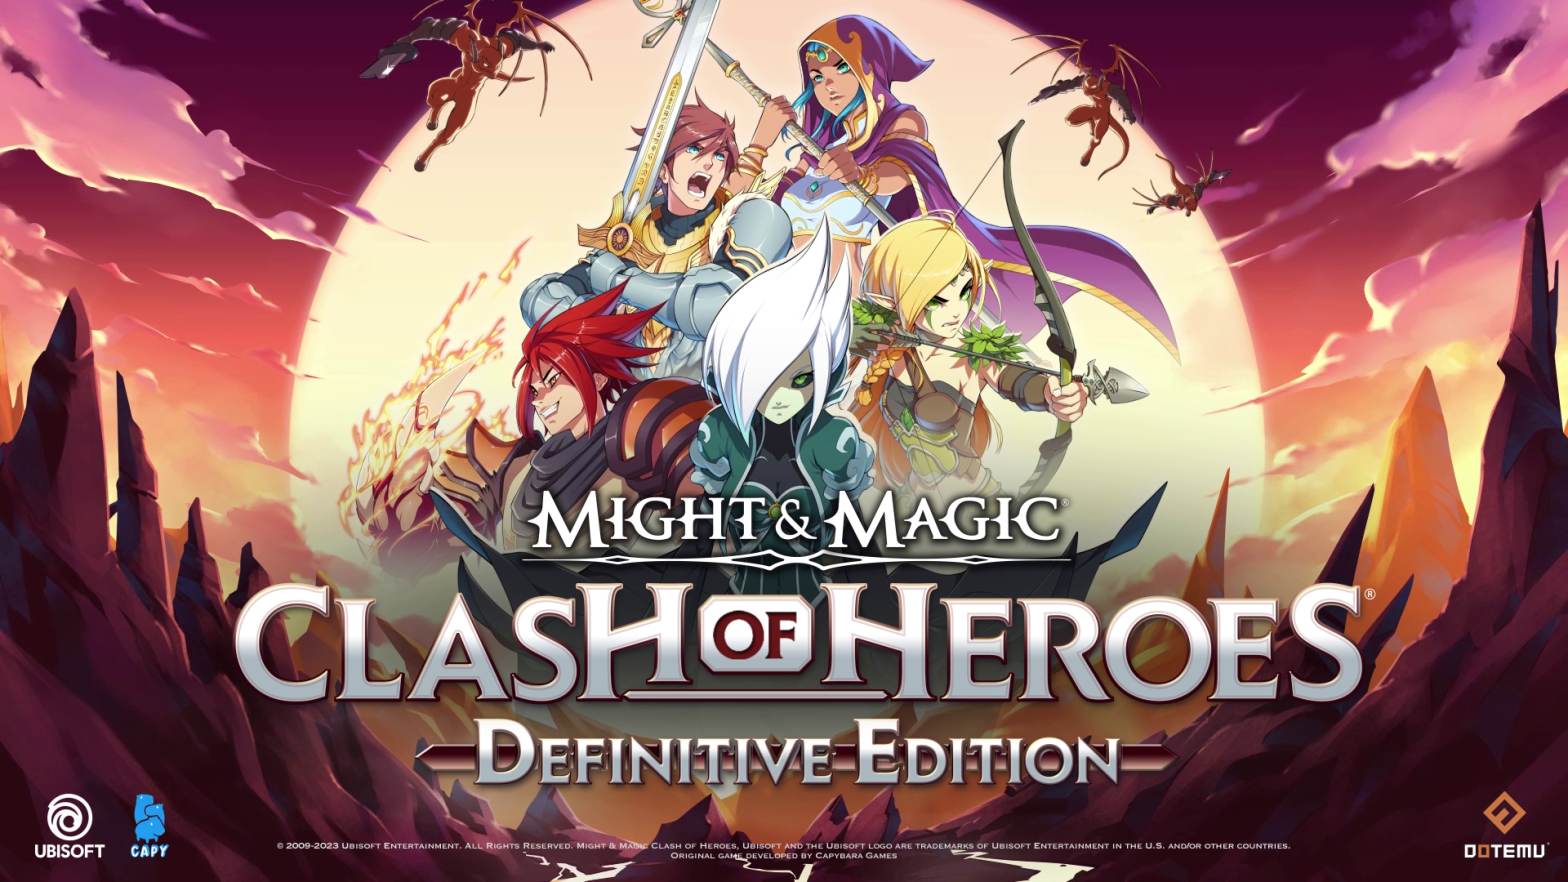 Might & Magic: Clash of Heroes – Definitive Edition Casts a Spell on PC & Consoles This Summer